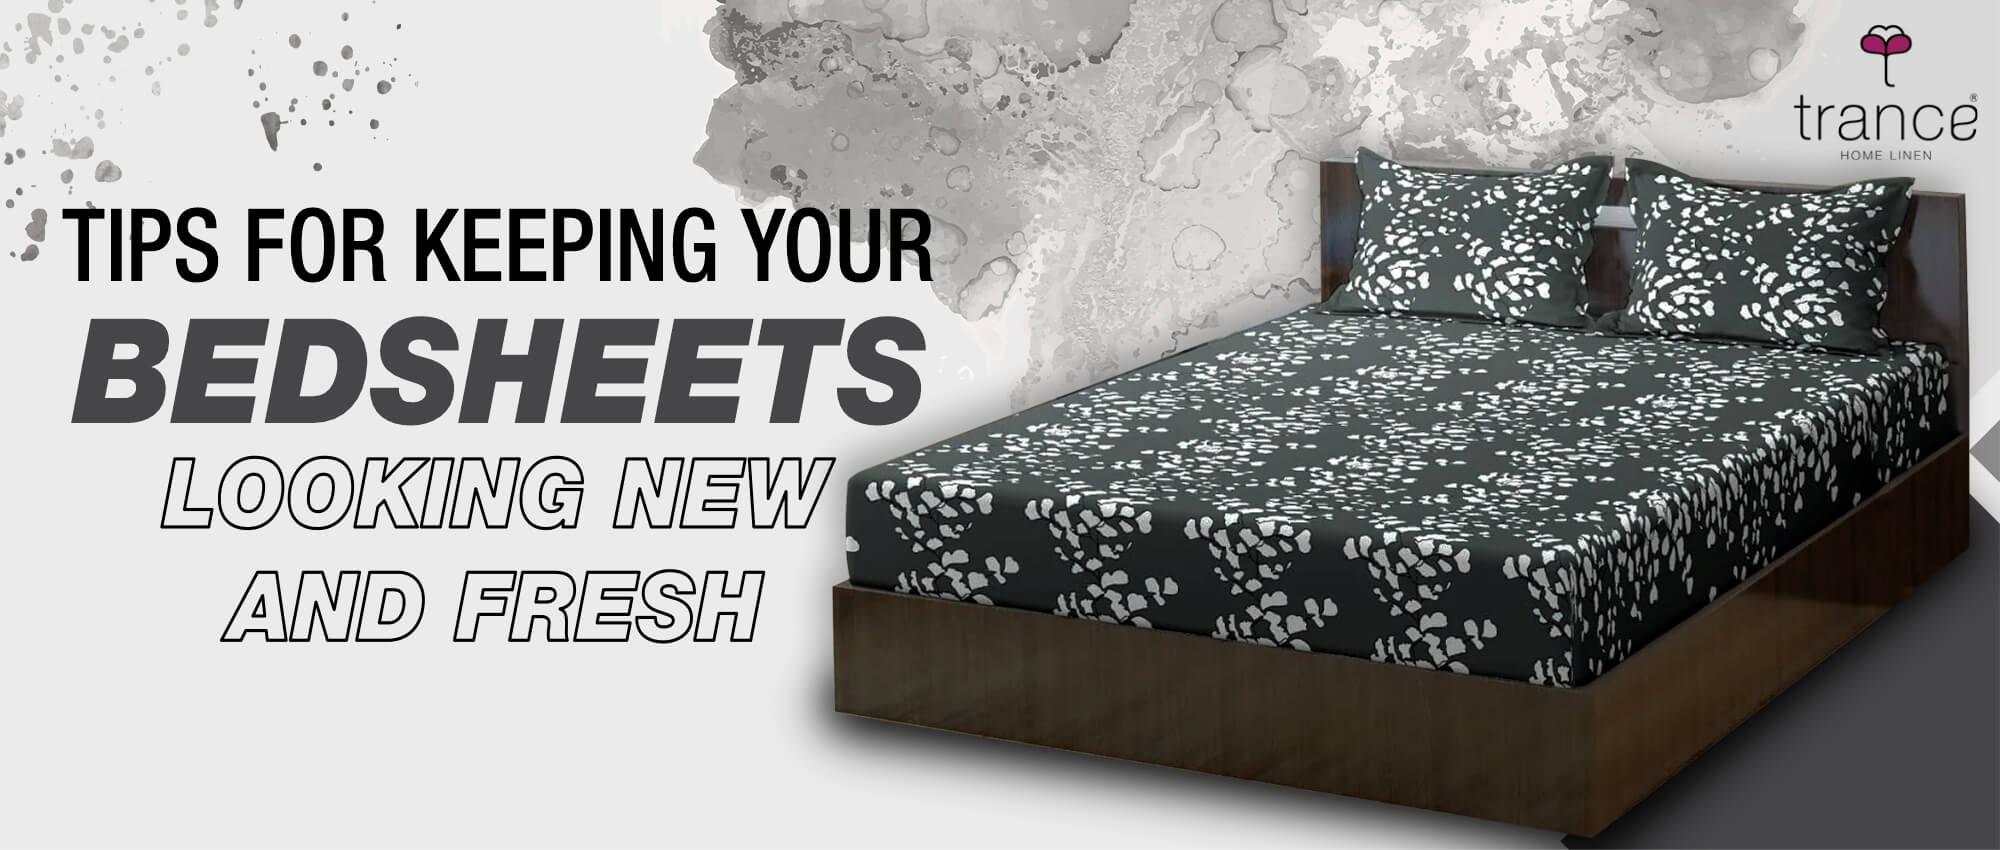 Fitted-bedsheets-king-size